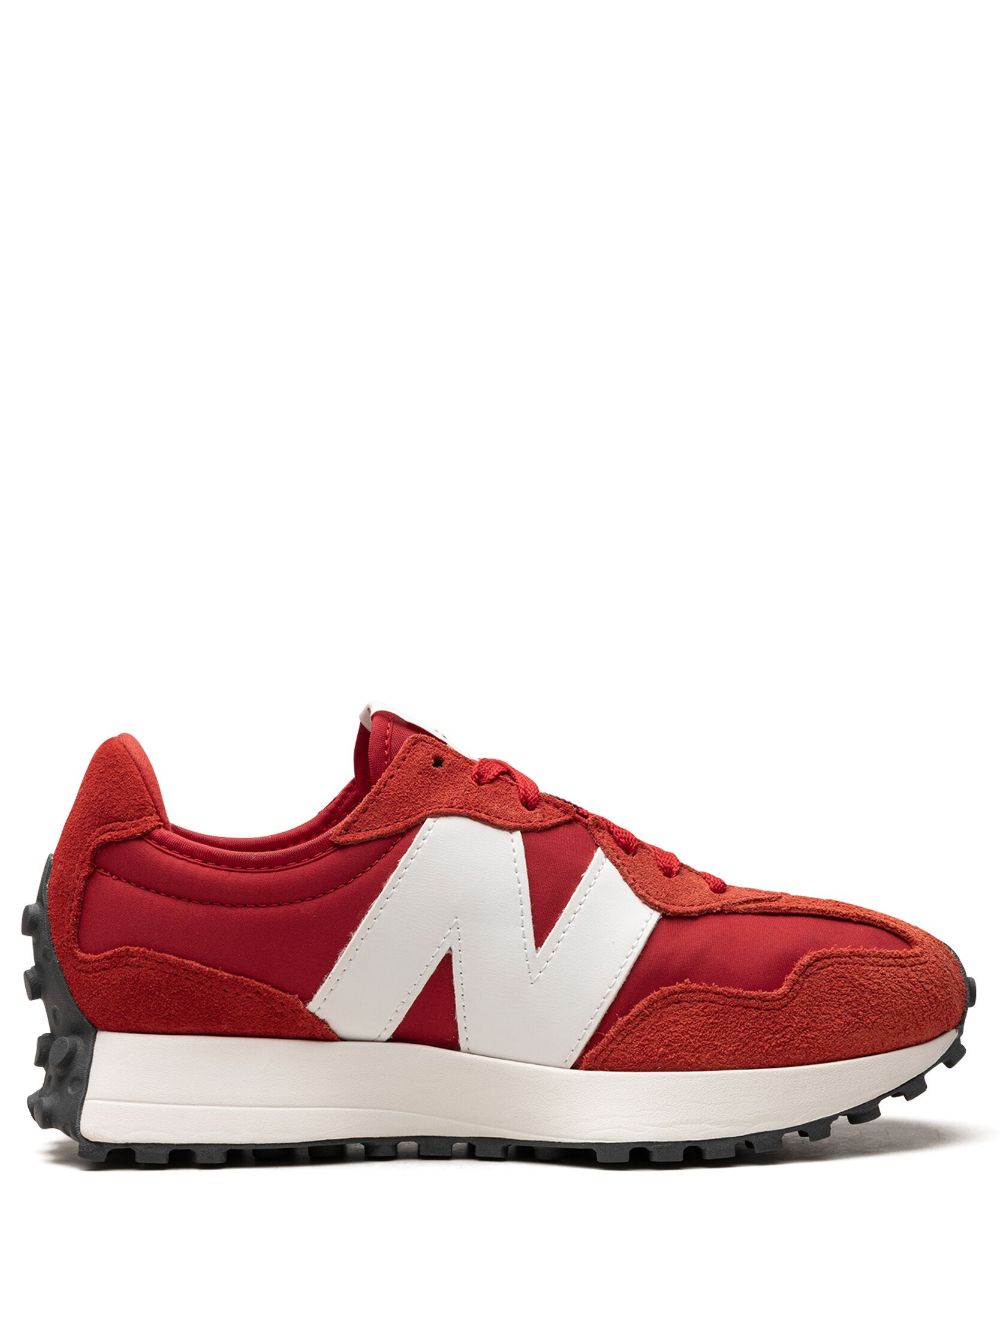 New Balance 327 "Red/White" sneakers